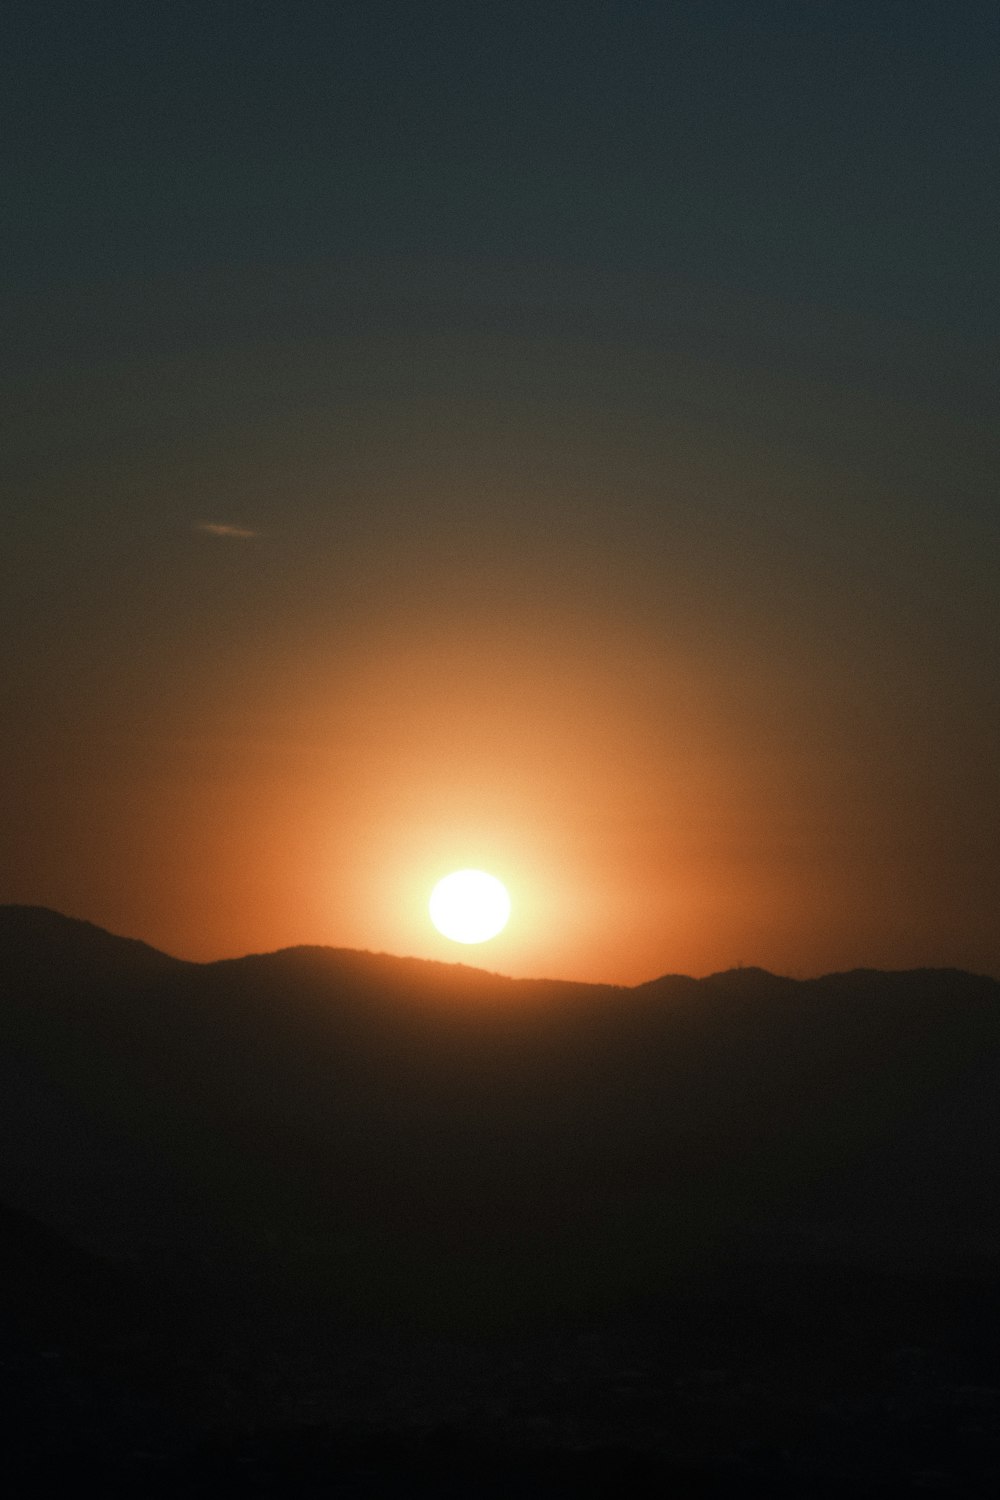 sun setting over the mountains